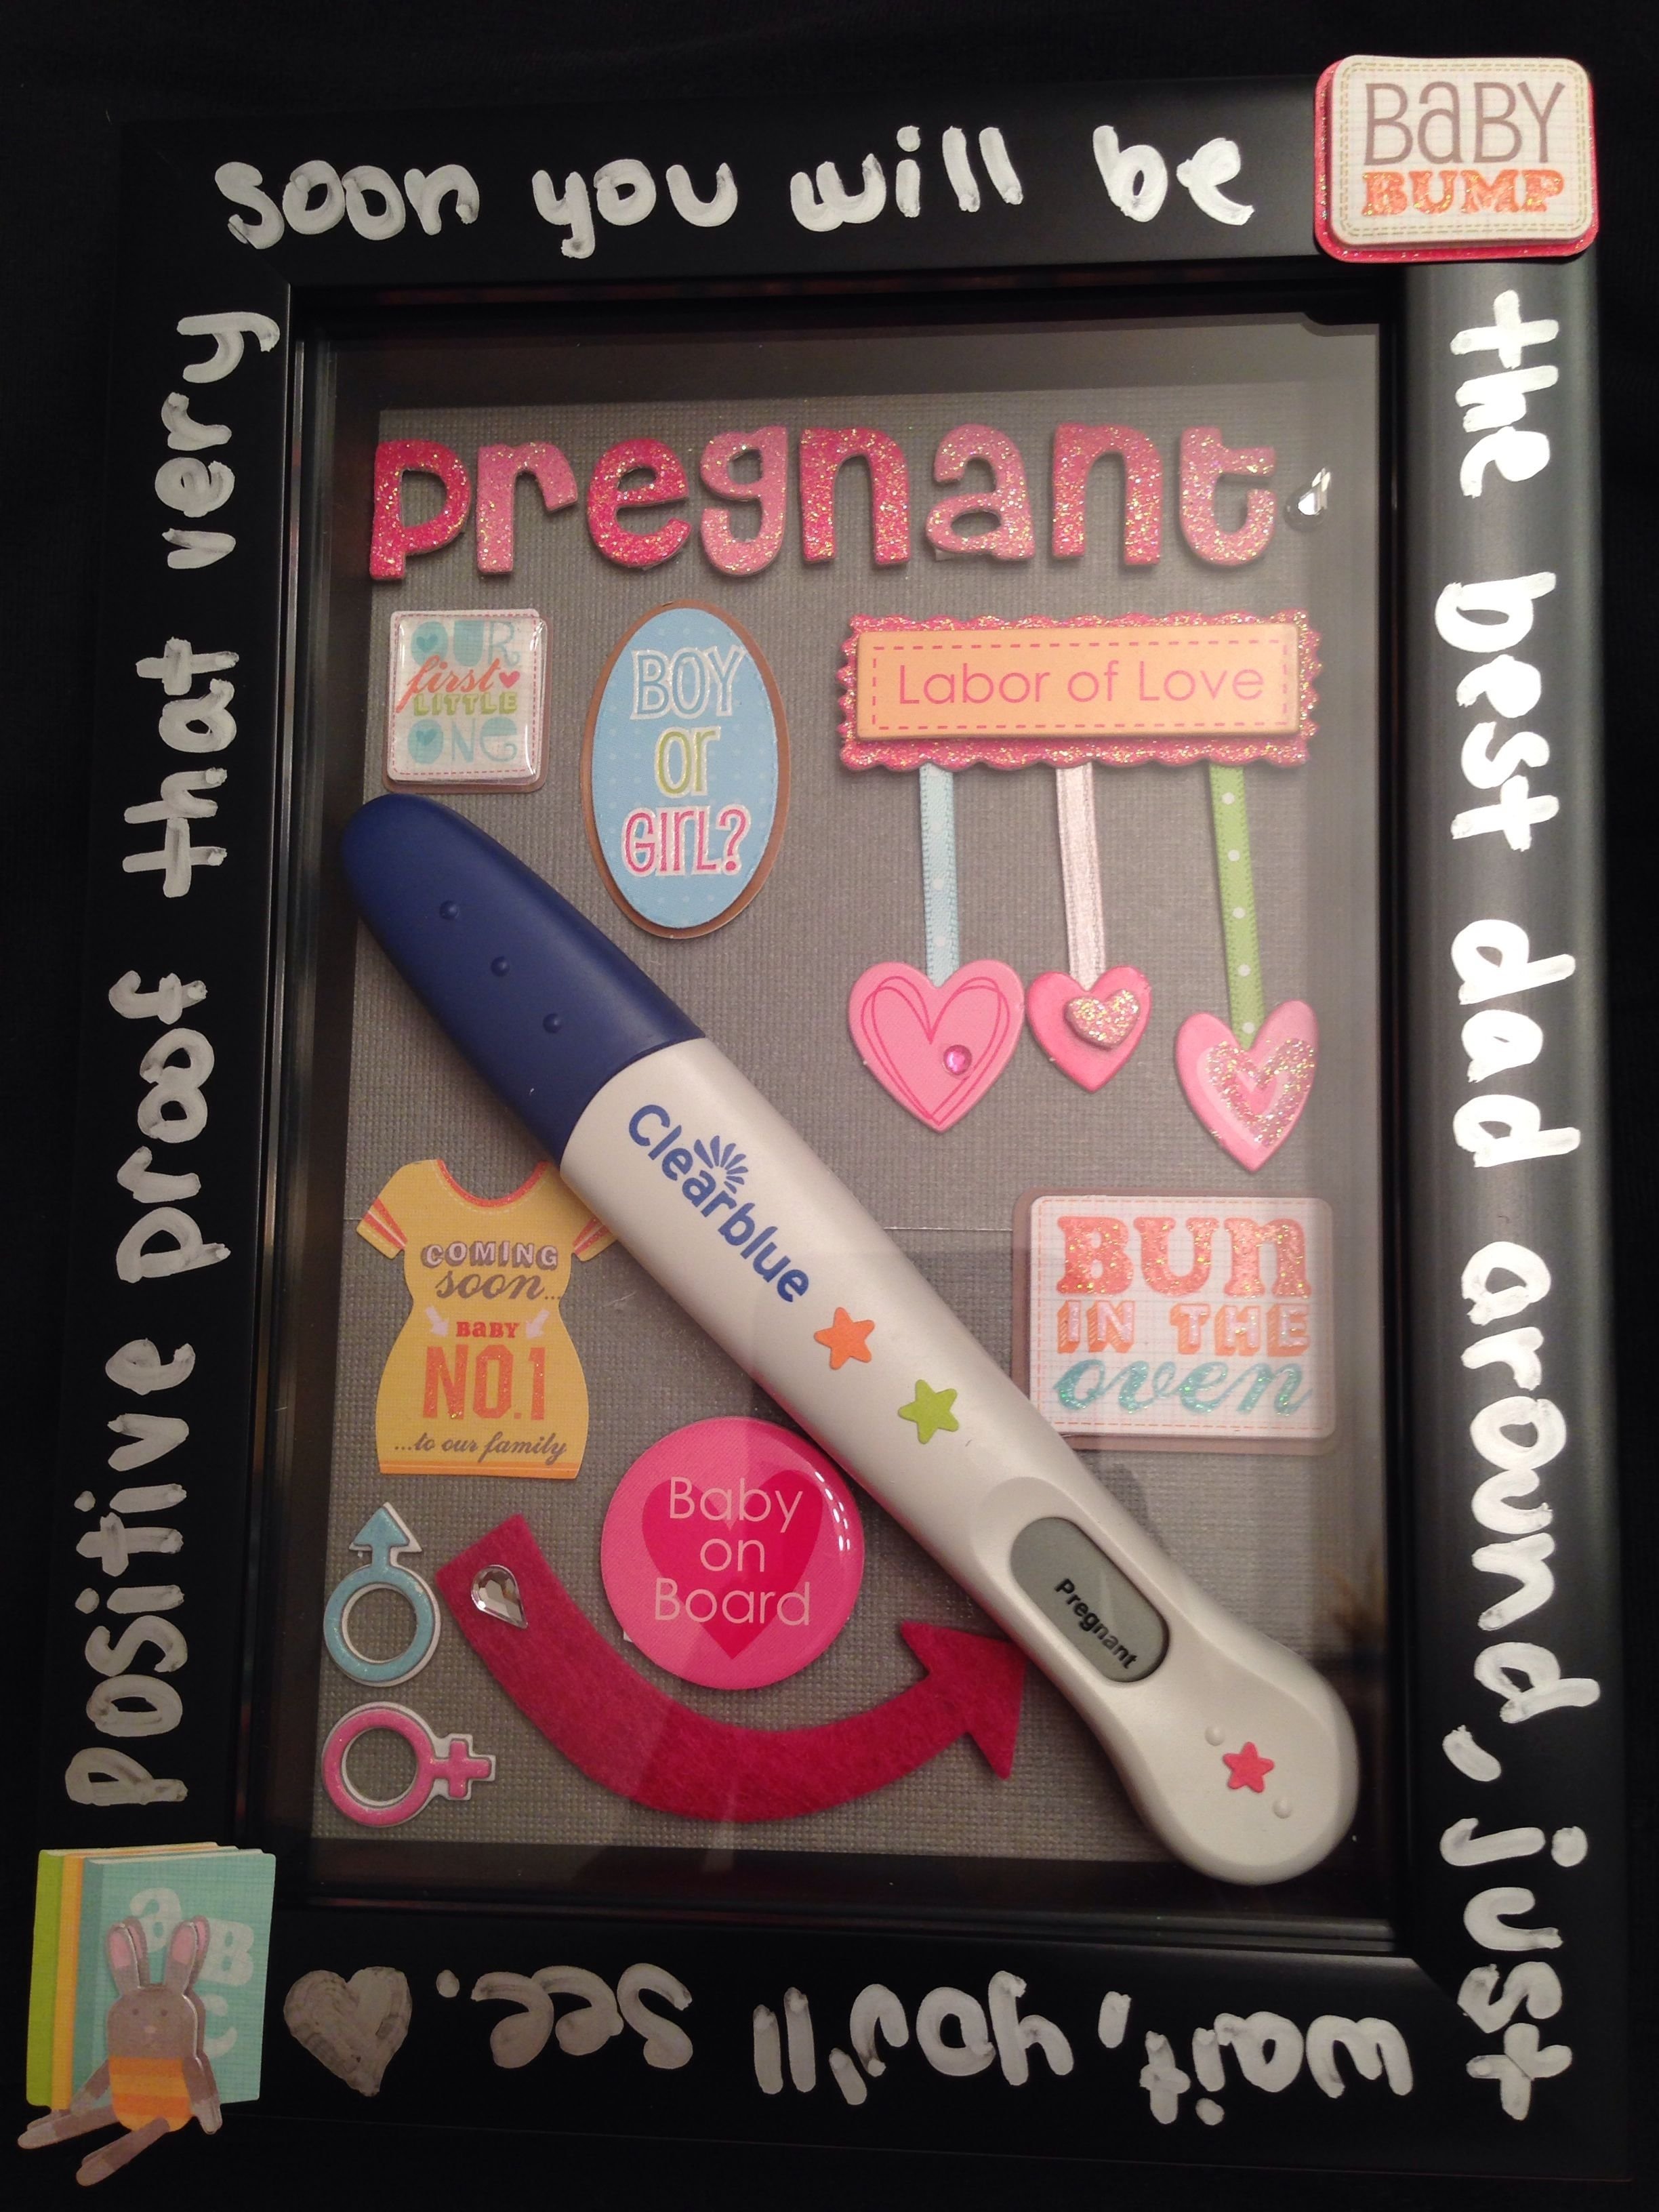 cute ways to announce pregnancy to husband